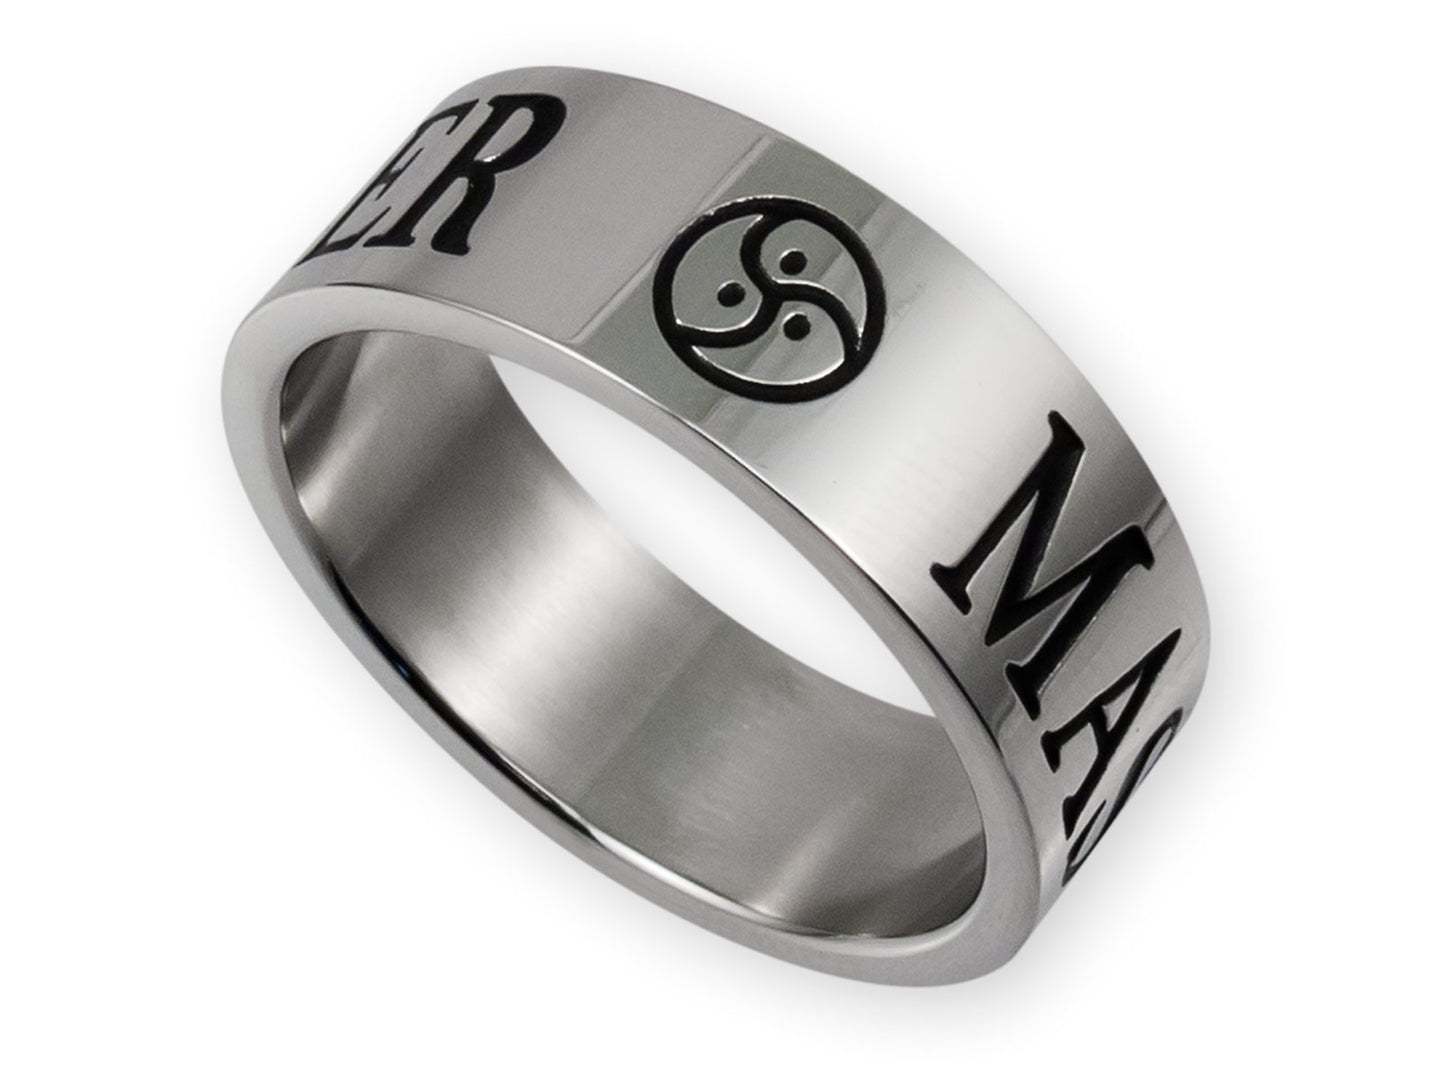 Stainless steel ring with Master (different sizes)